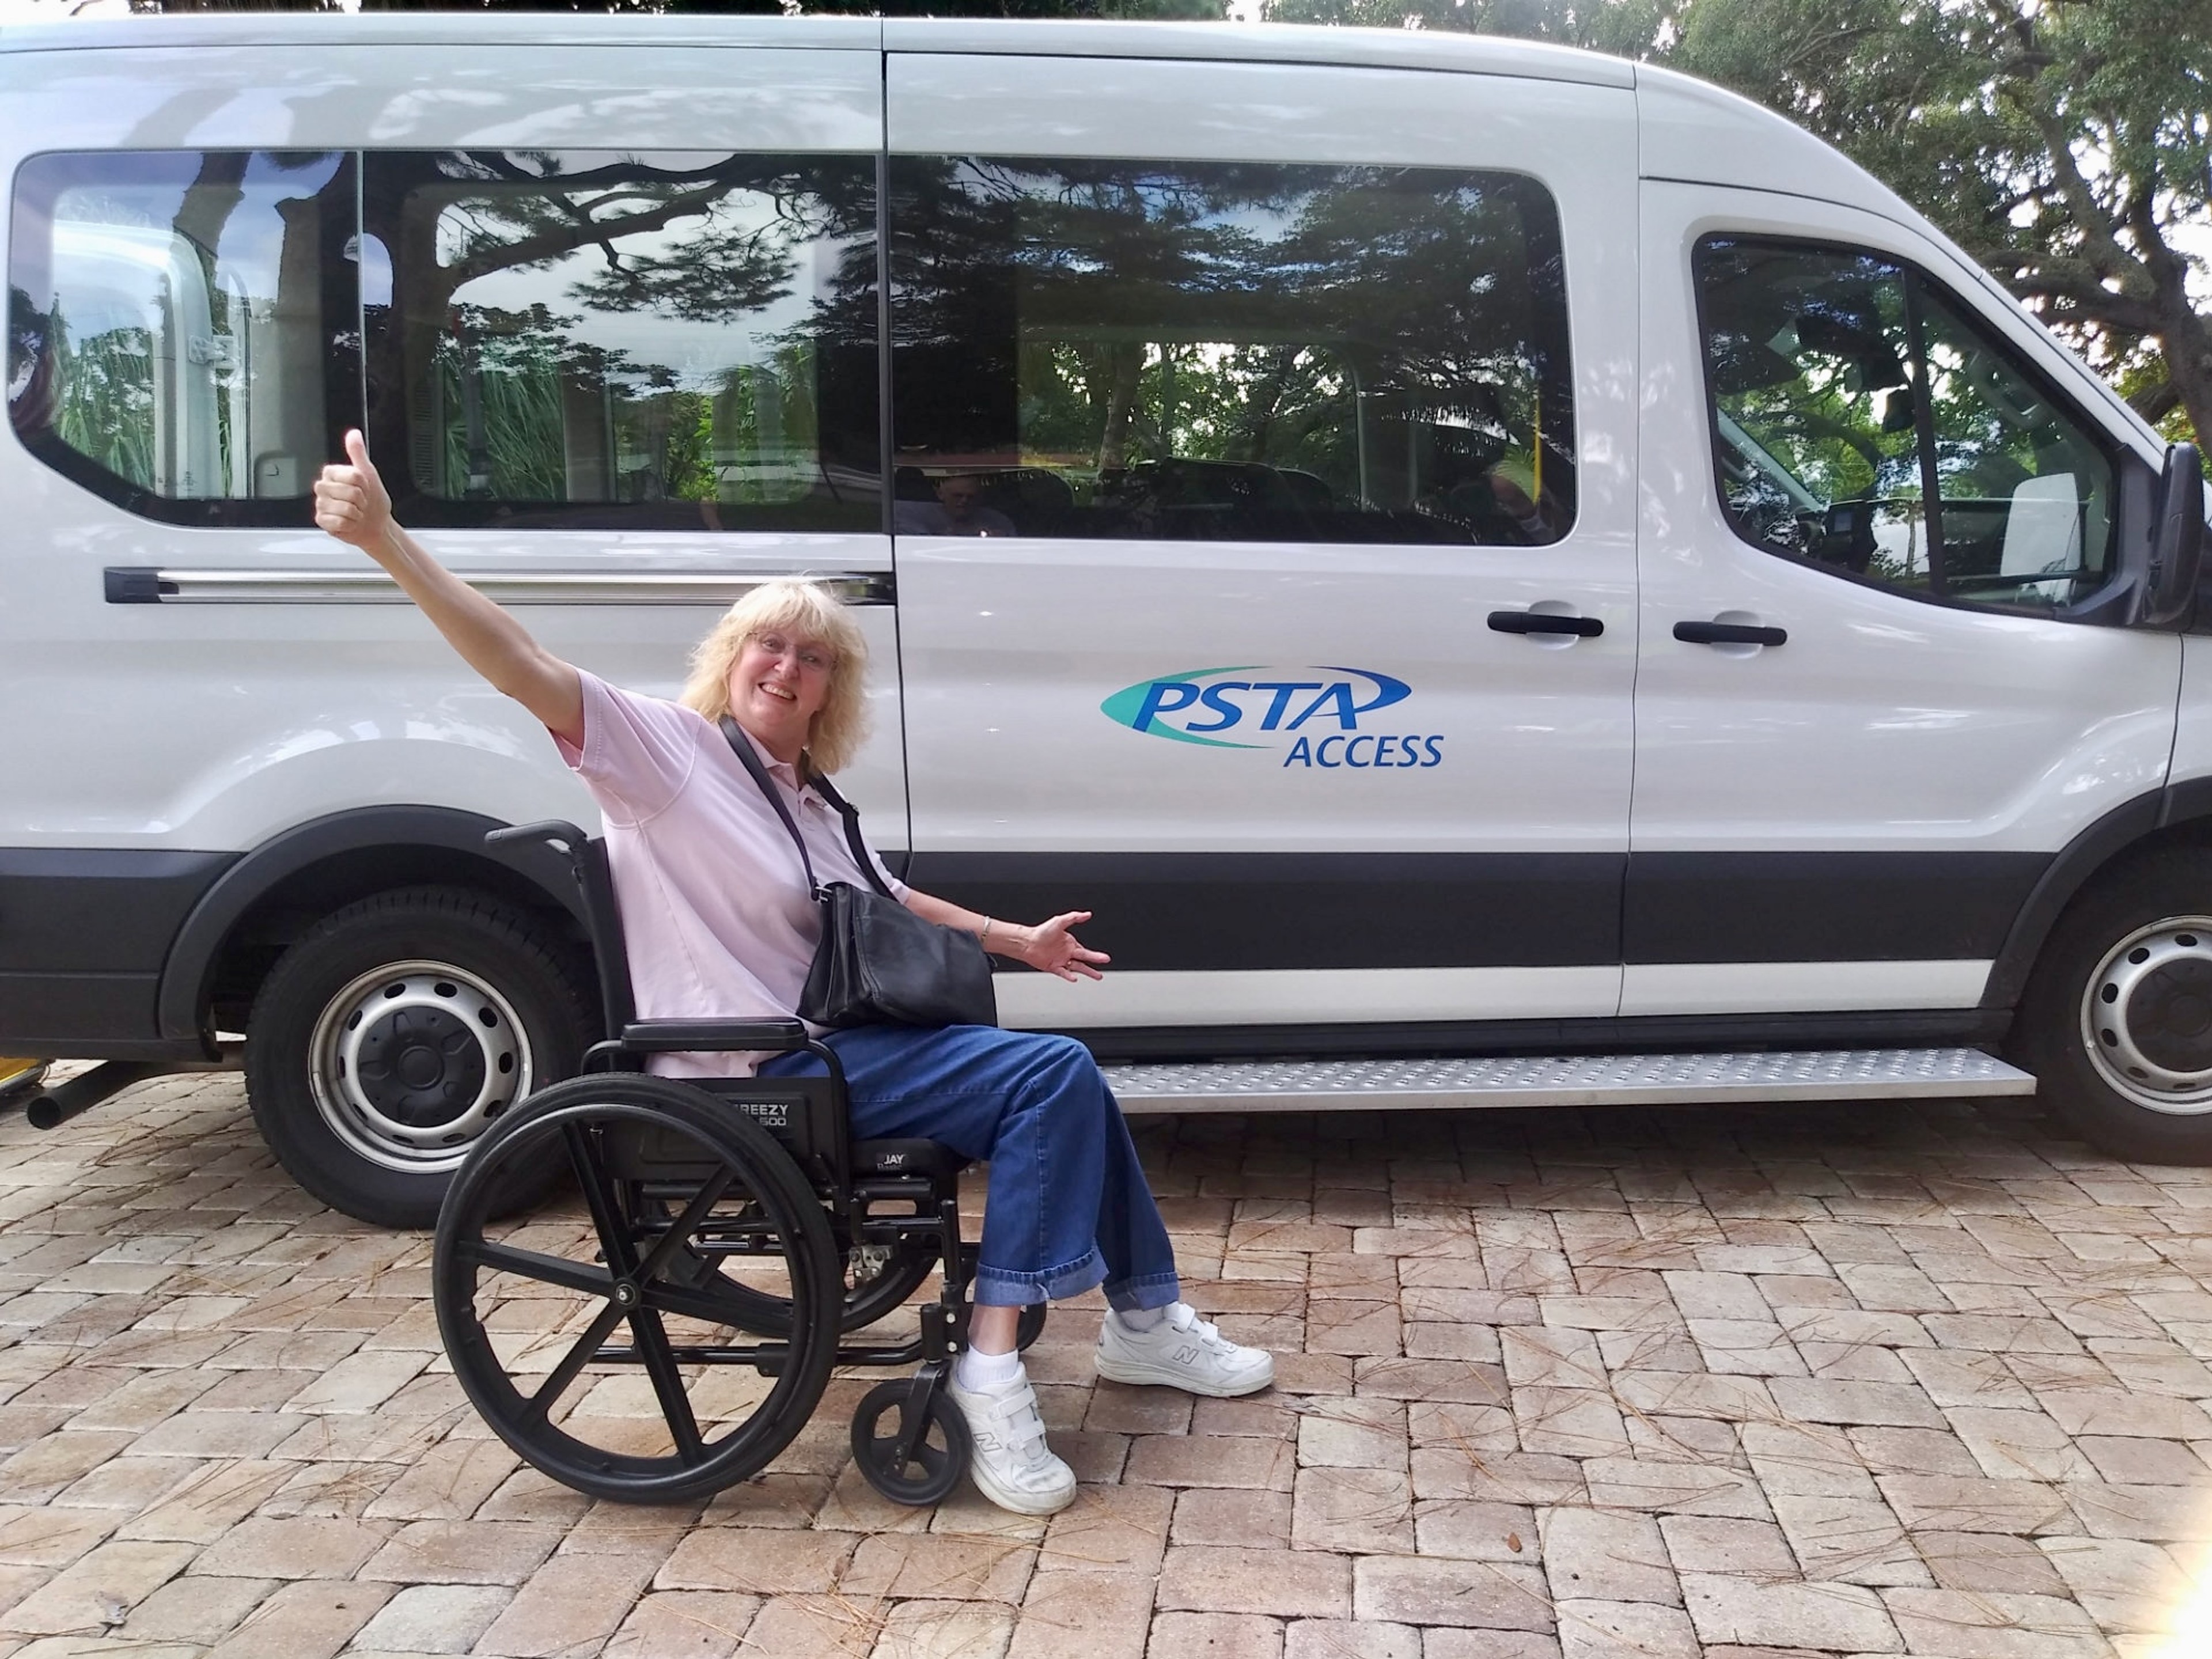 A photo of paratransit rider, Kim Rankine, in front of a PSTA Access Wheelchair Accessible Vehicle (WAV).  